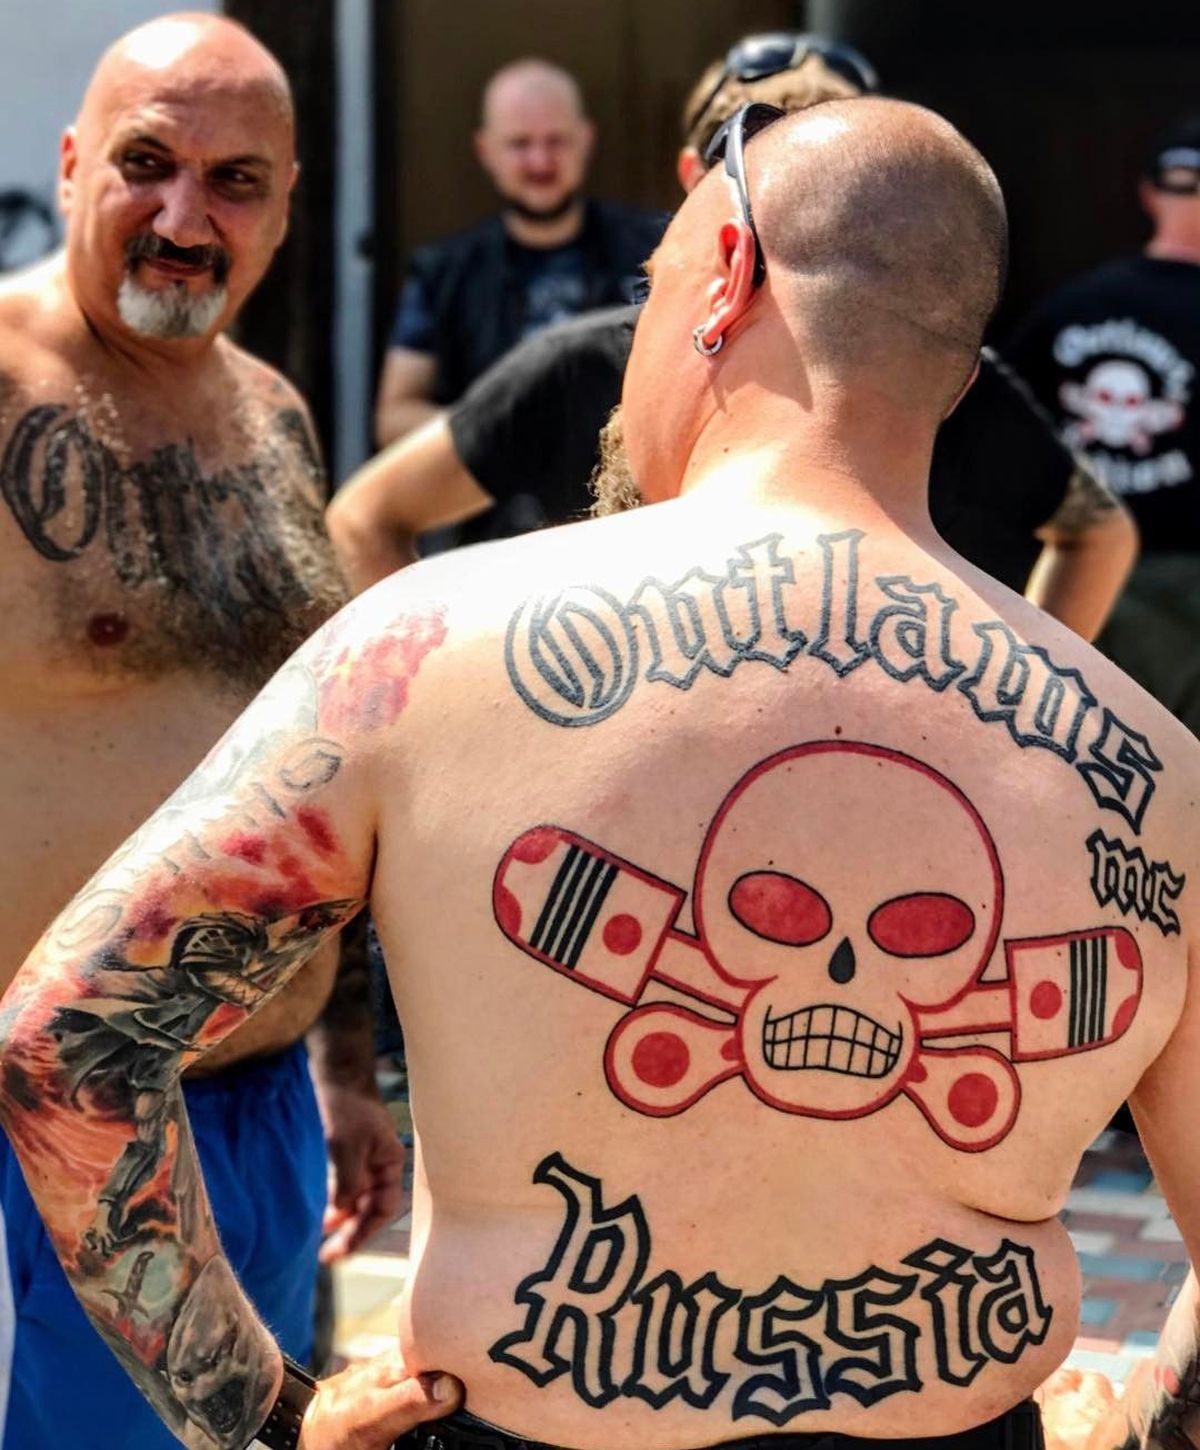 Outlaws Motorcycle Clubs Have Crazy Hazing Rituals 